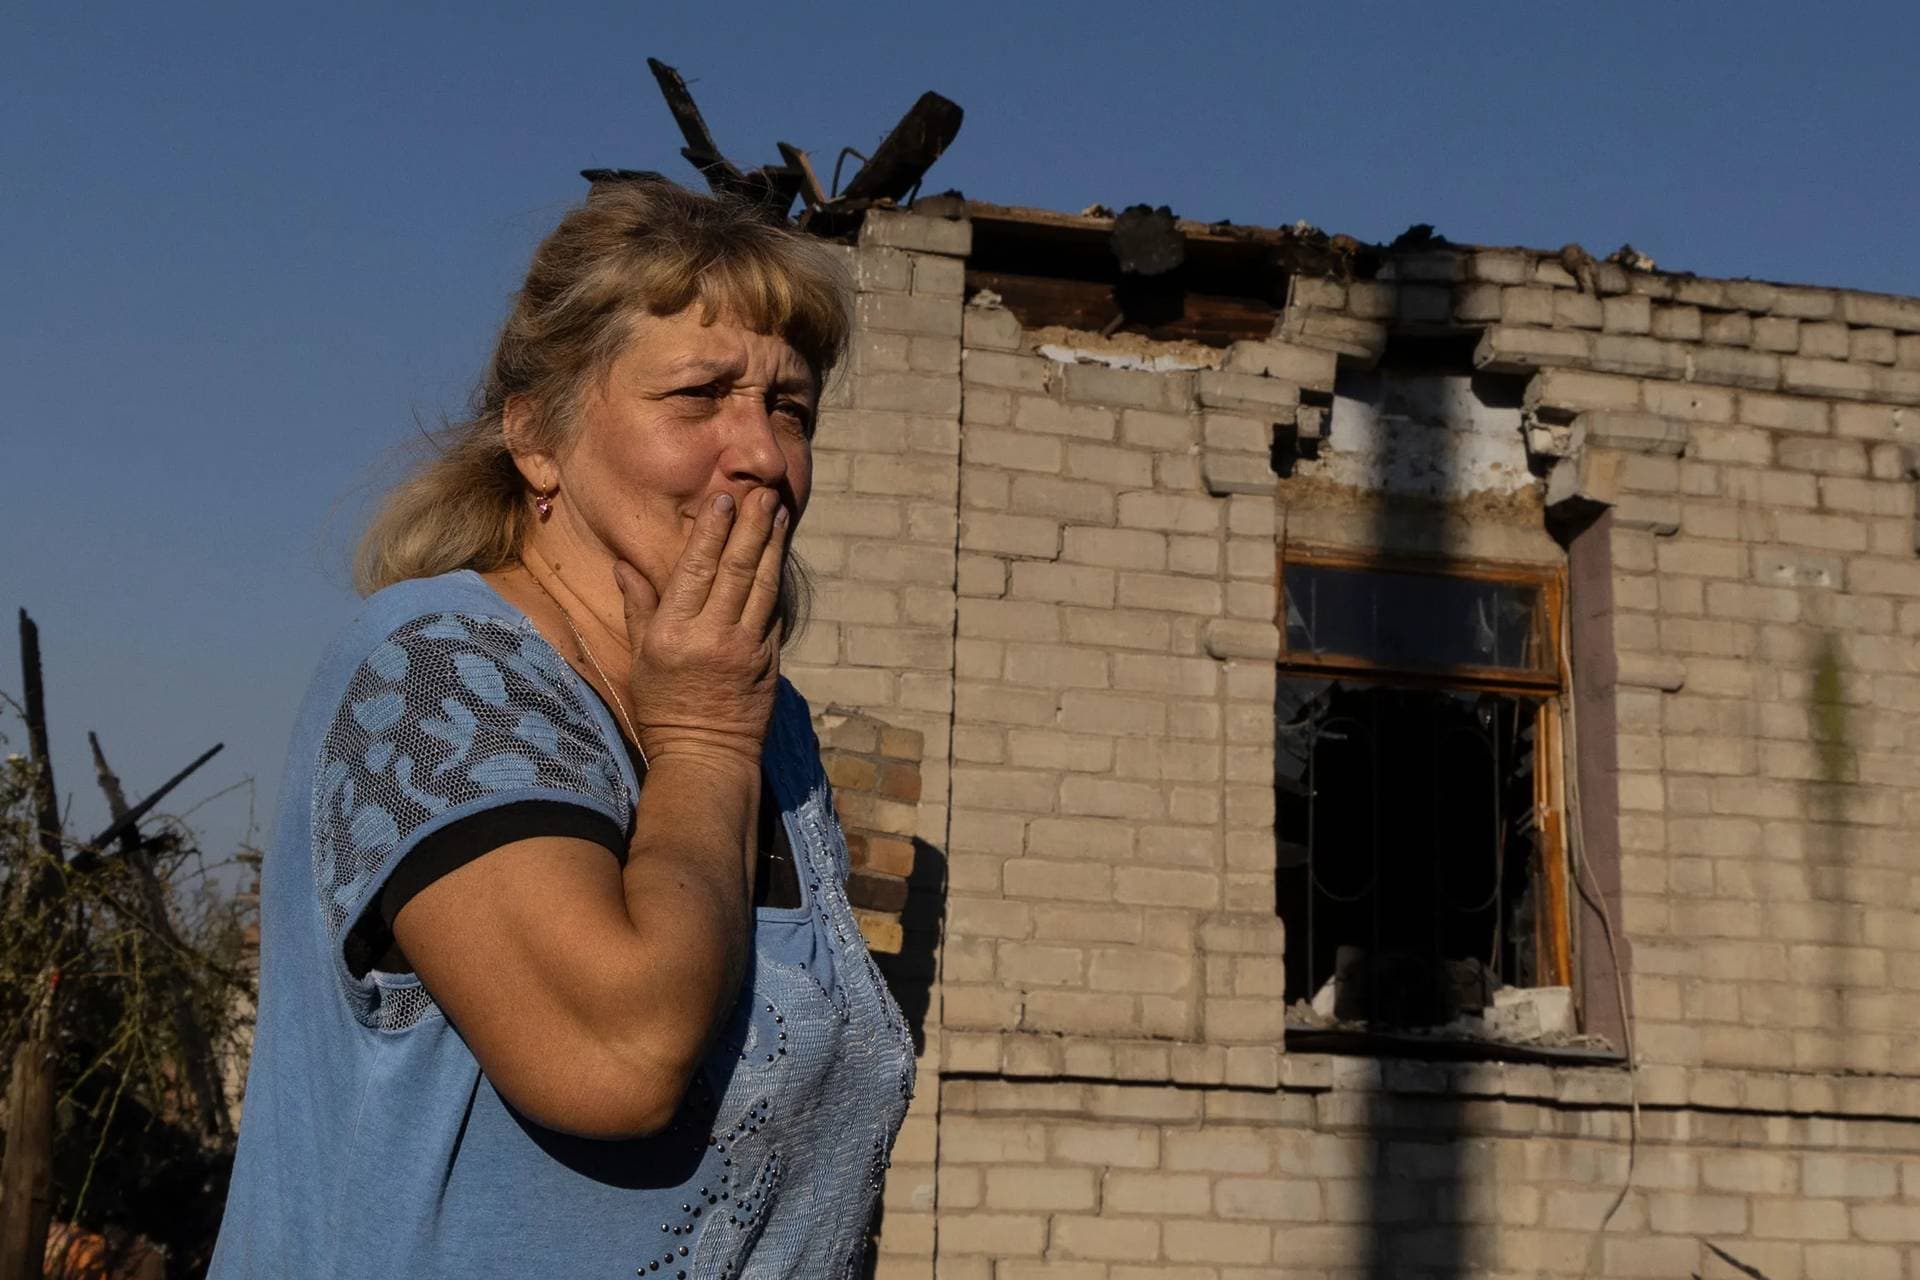 Olena Kononenko, 61, reacts in the yard of her house damaged by a Russian rocket attack in Kostiantynivka